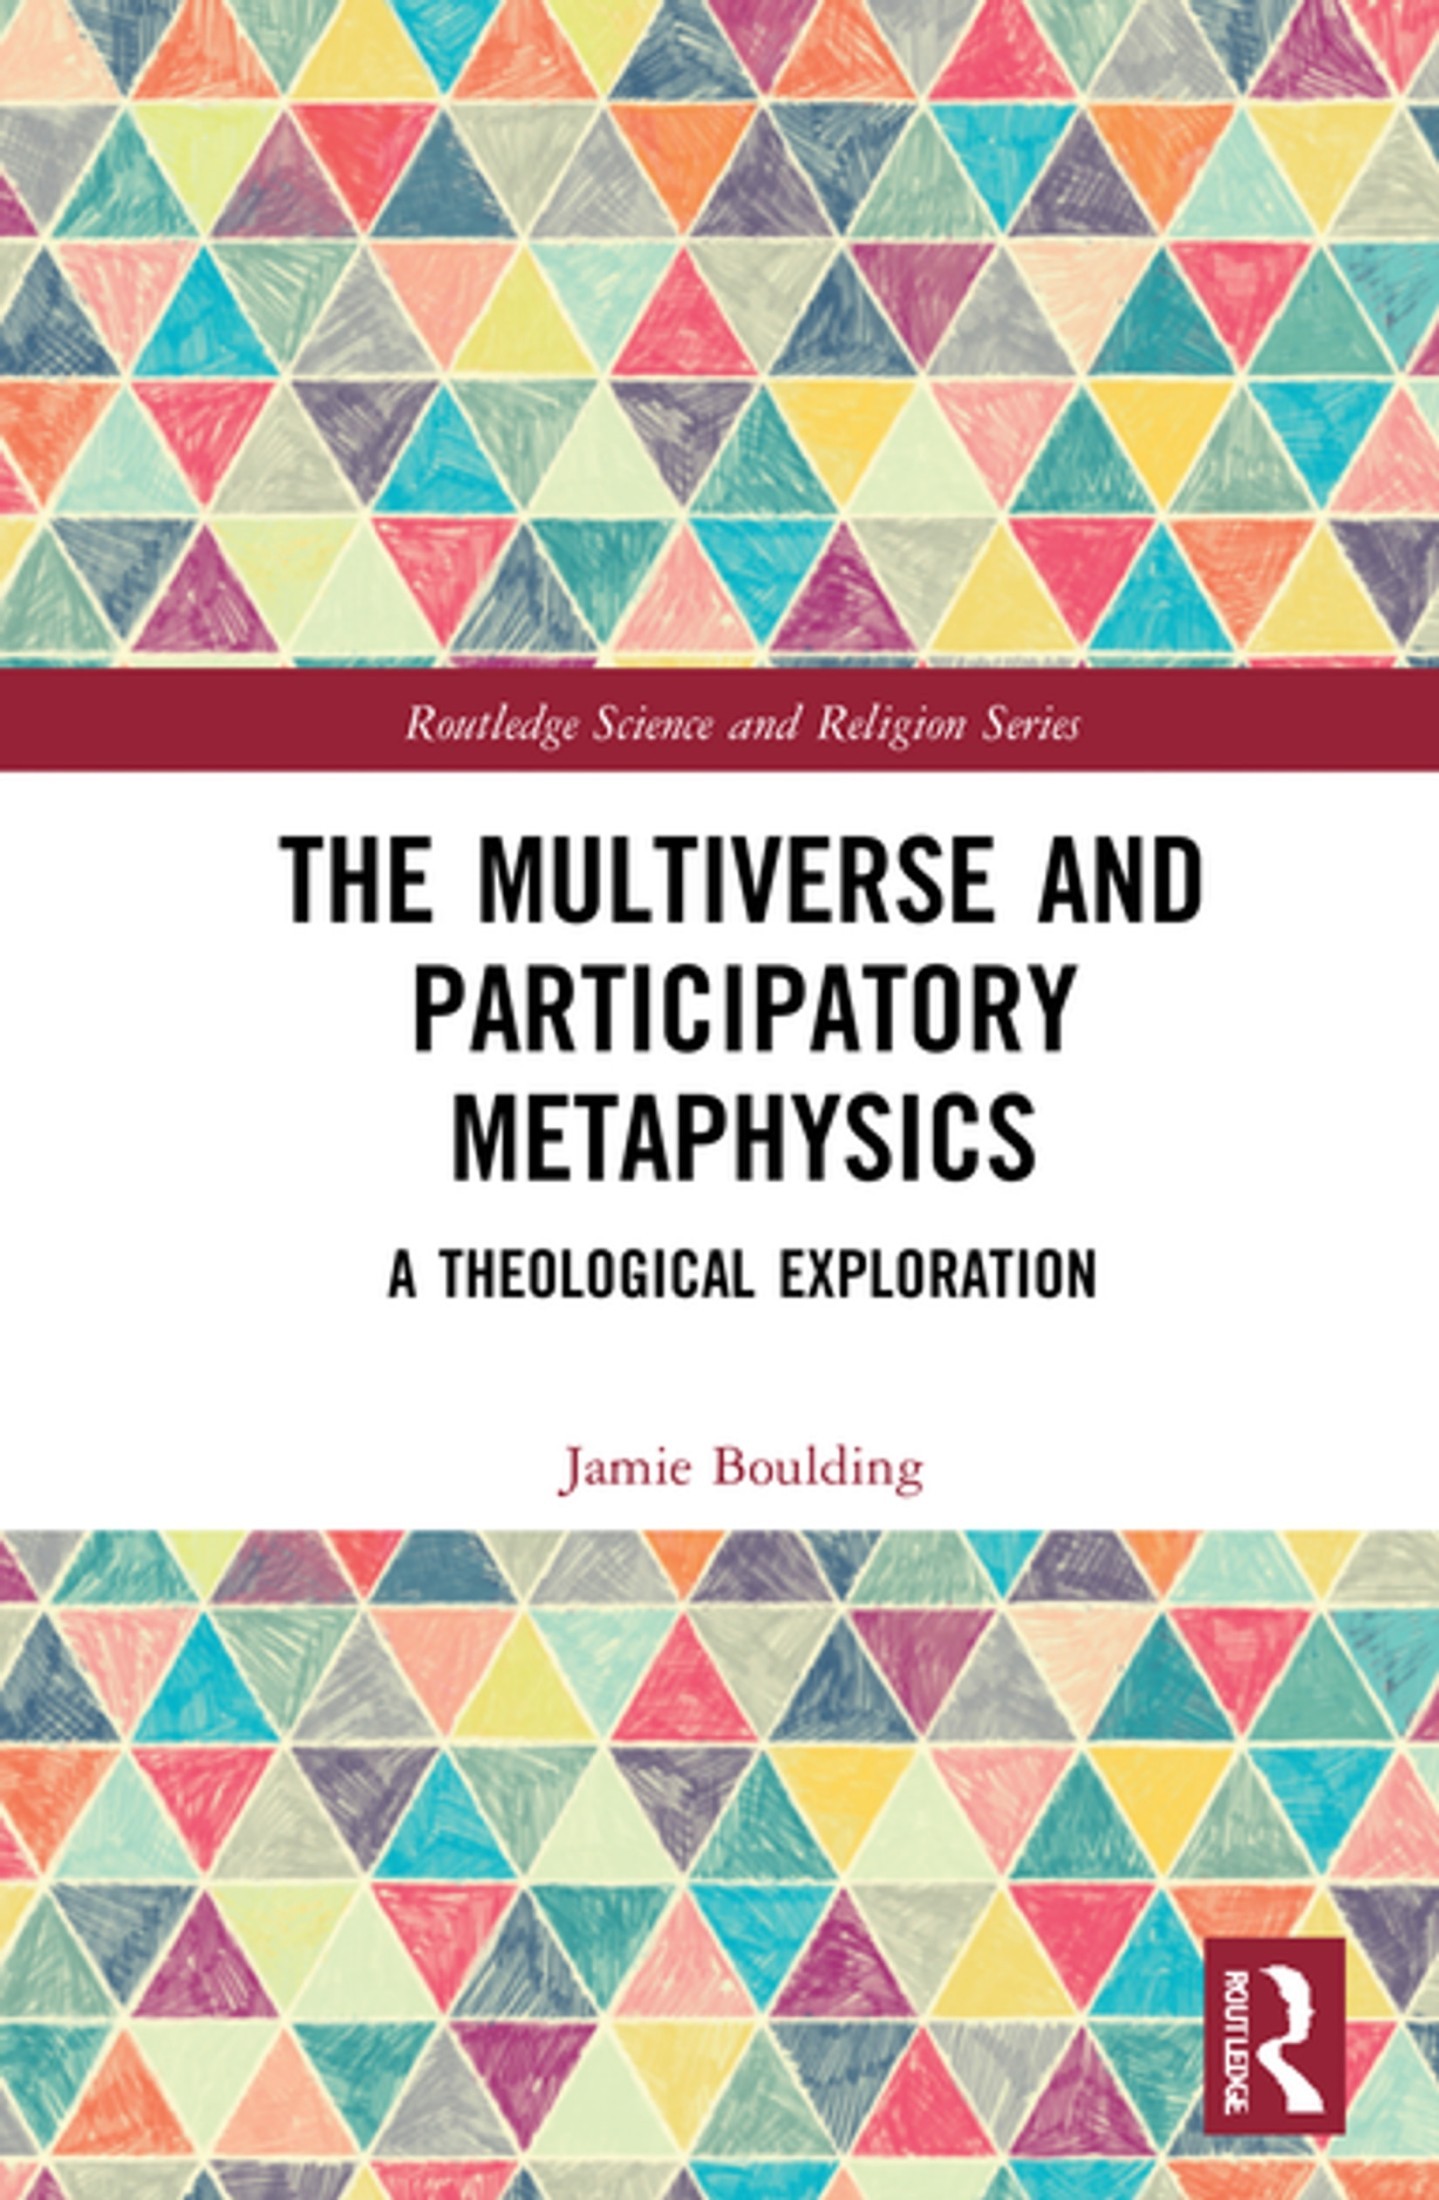 The Multiverse and Participatory Metaphysics